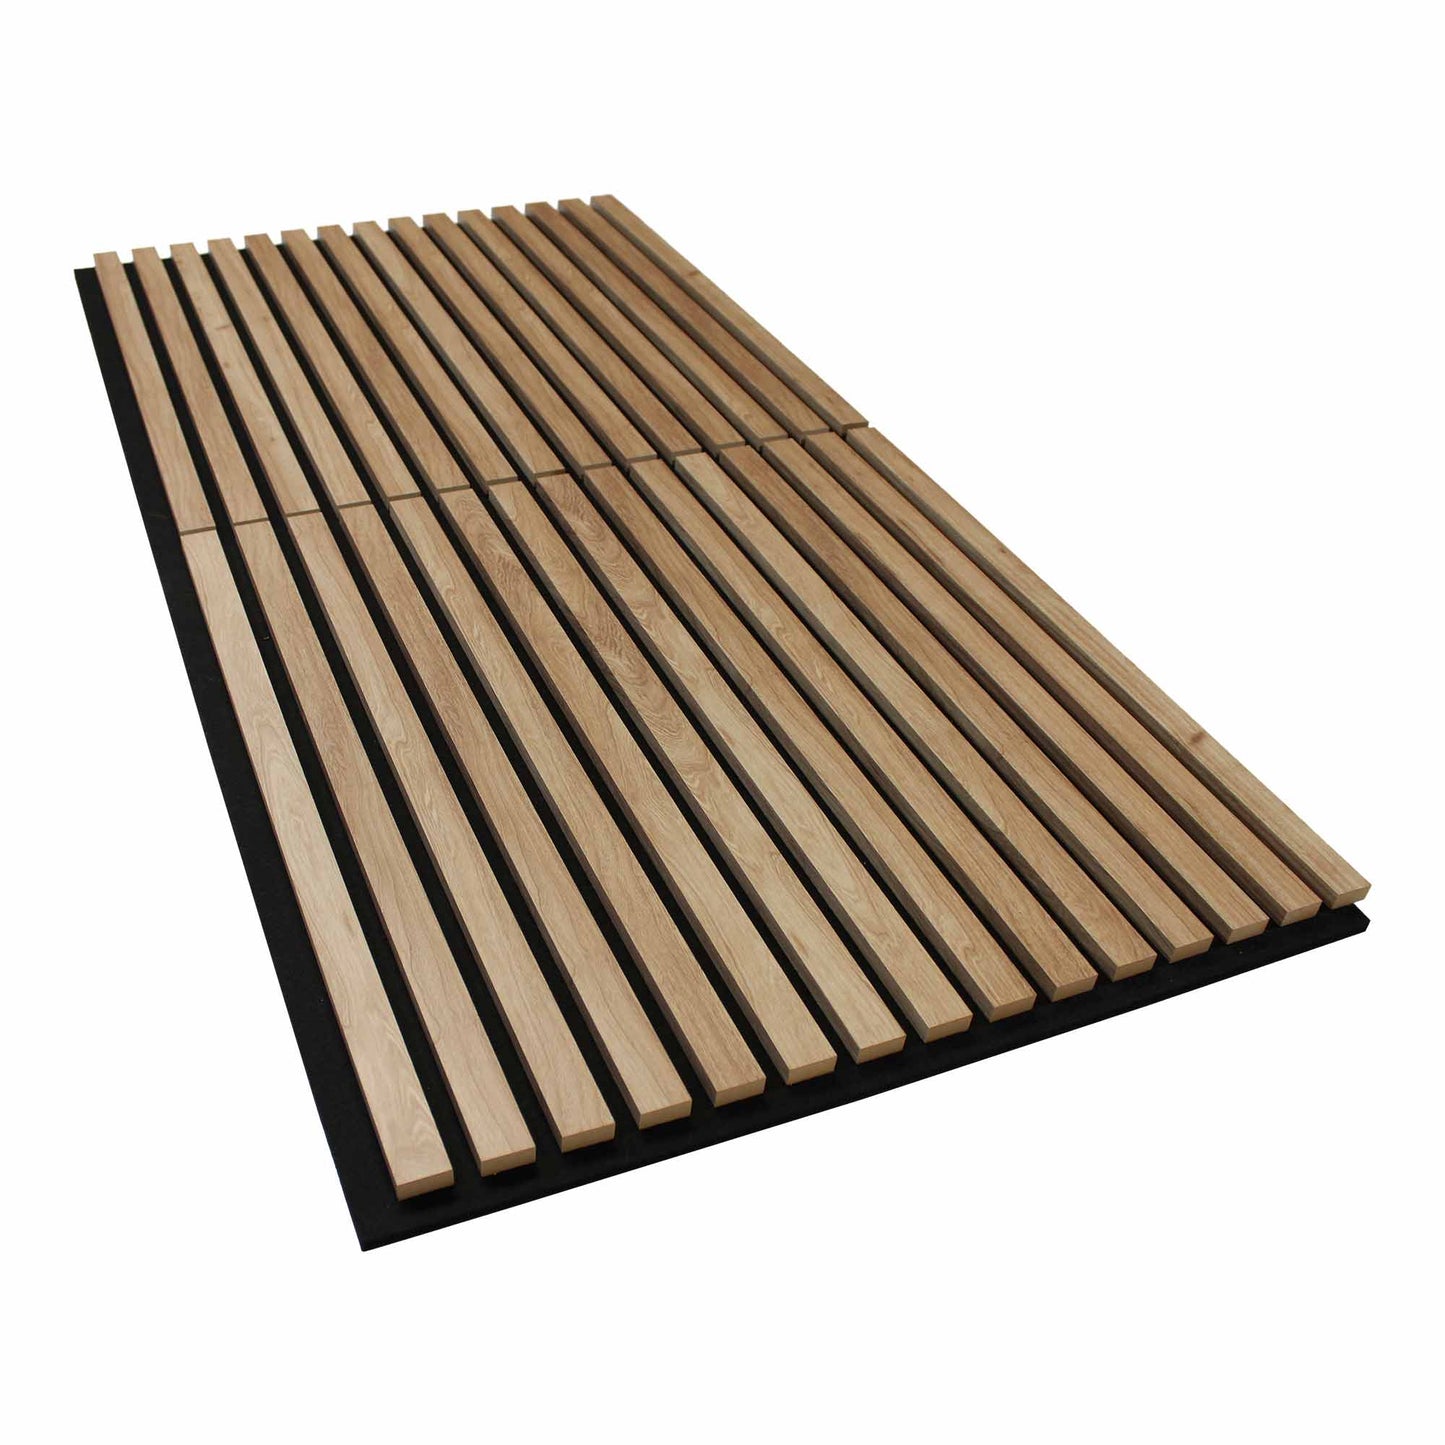 Light Walnut Acoustic Slat Wood Paneling for Soundproofing Walls - Square Tiles (24" x 24")